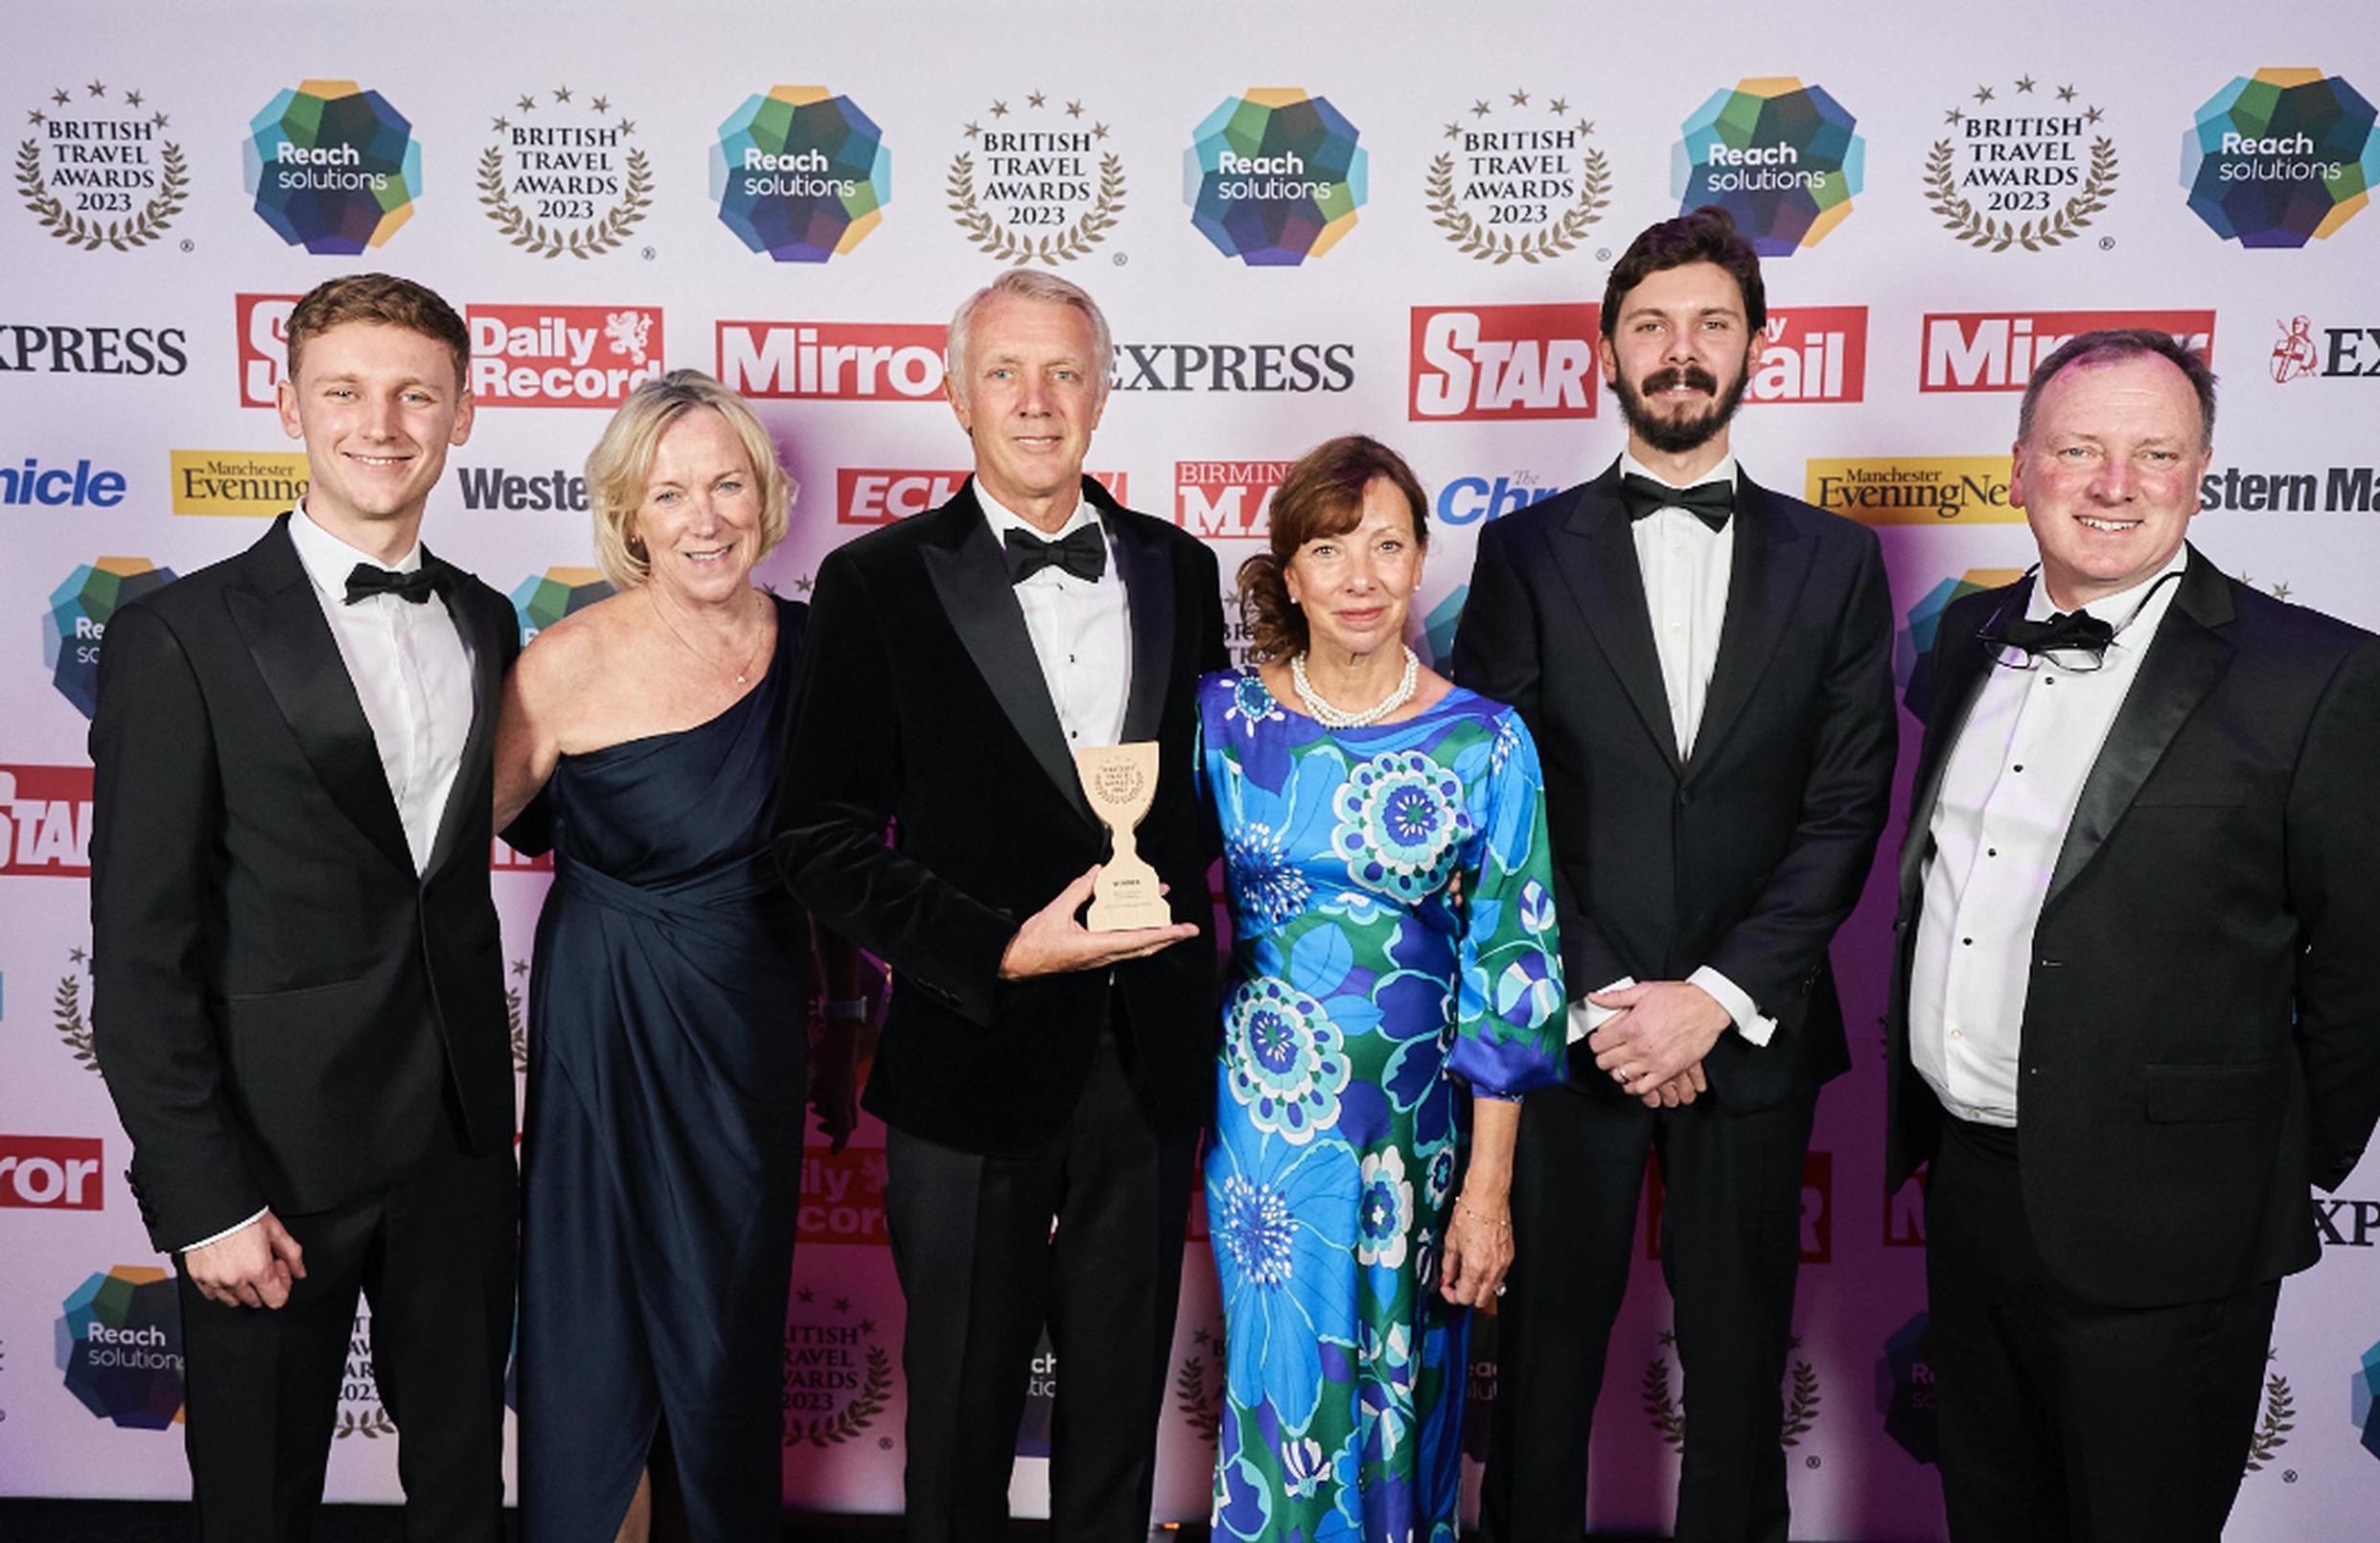 Freddie Caunter, Nicki Maden, Nick Caunter, Sarah Caunter, Harry Caunter, and Chris Voller from Airport Parking & Hotels (APH) win the award for ‘Best Company for Airport Parking’ for the 13th year running at the British Travel Awards 2023